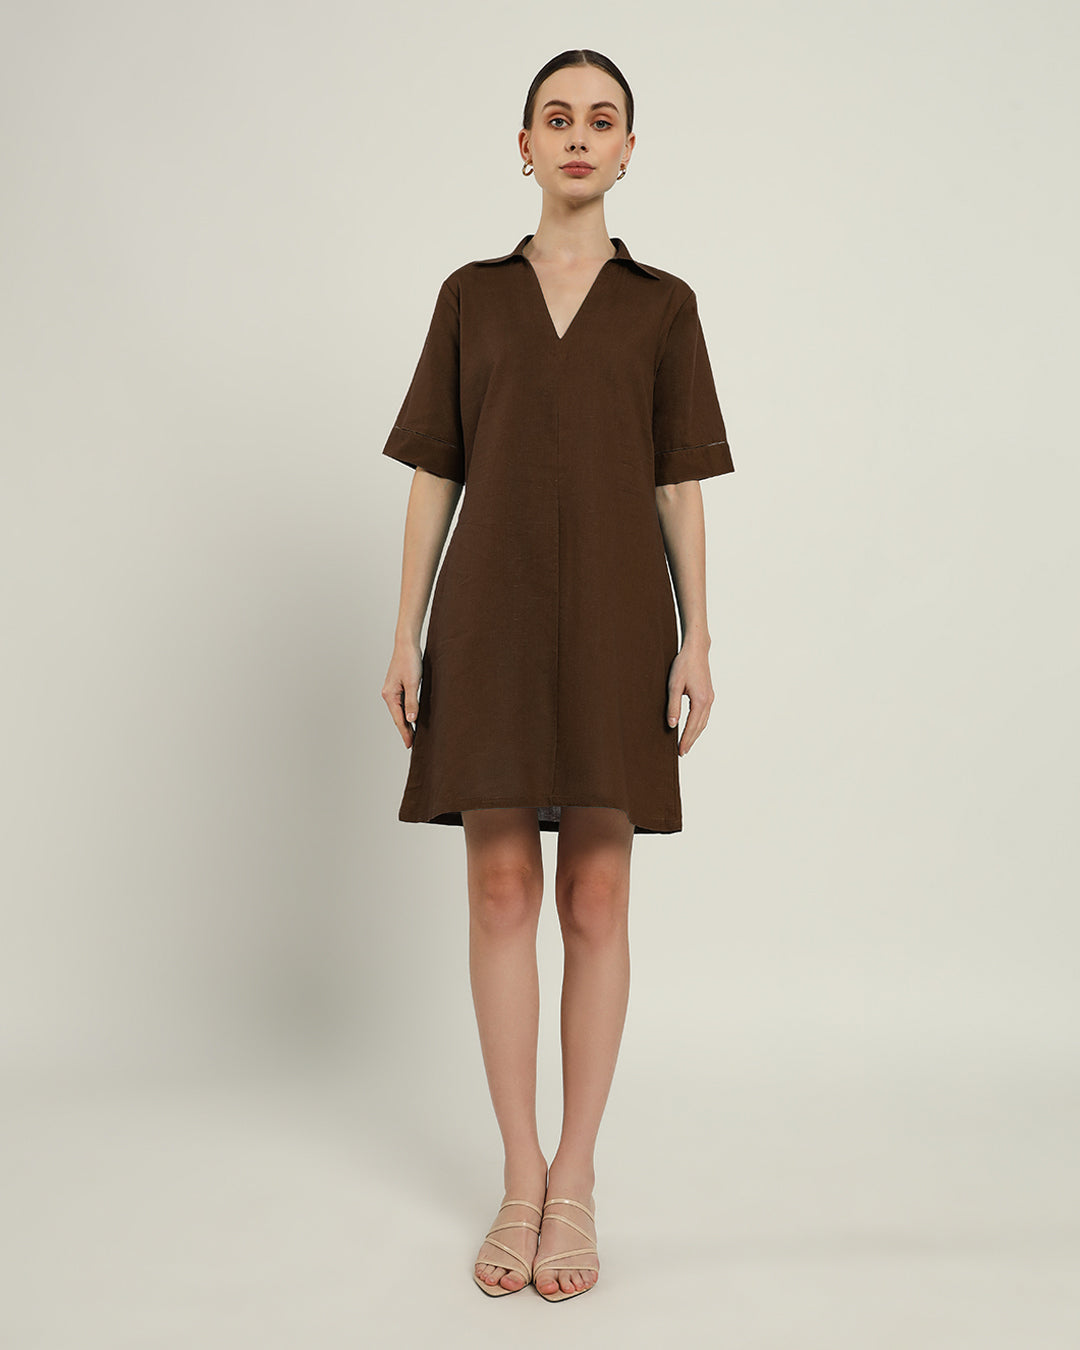 The Ermont Nutshell Dress